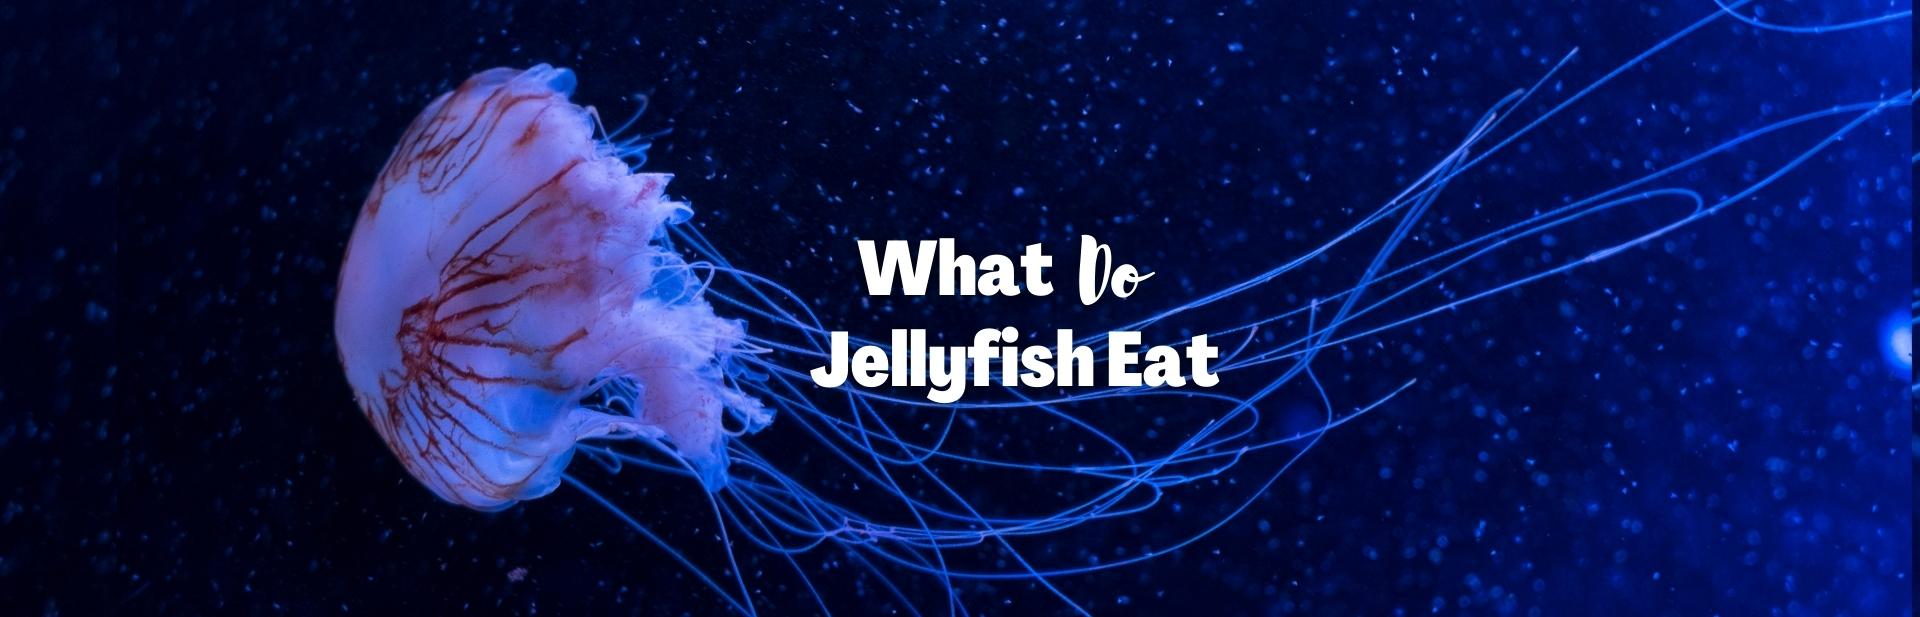 What Do Jellyfish Eat? Just About Anything They Can!